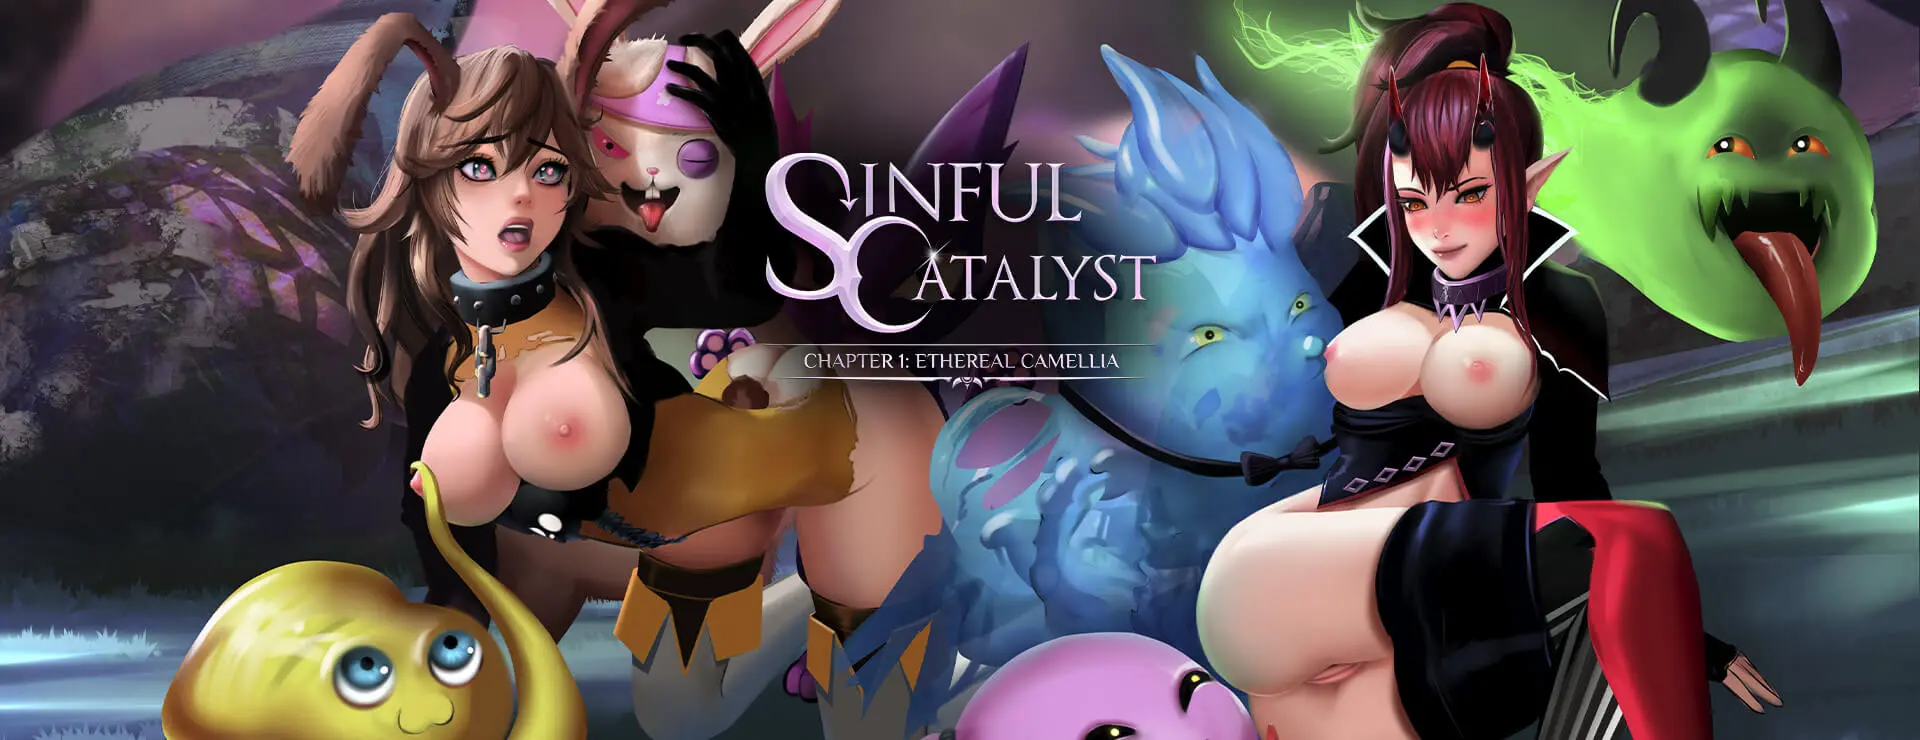 Sinful Catalyst main image